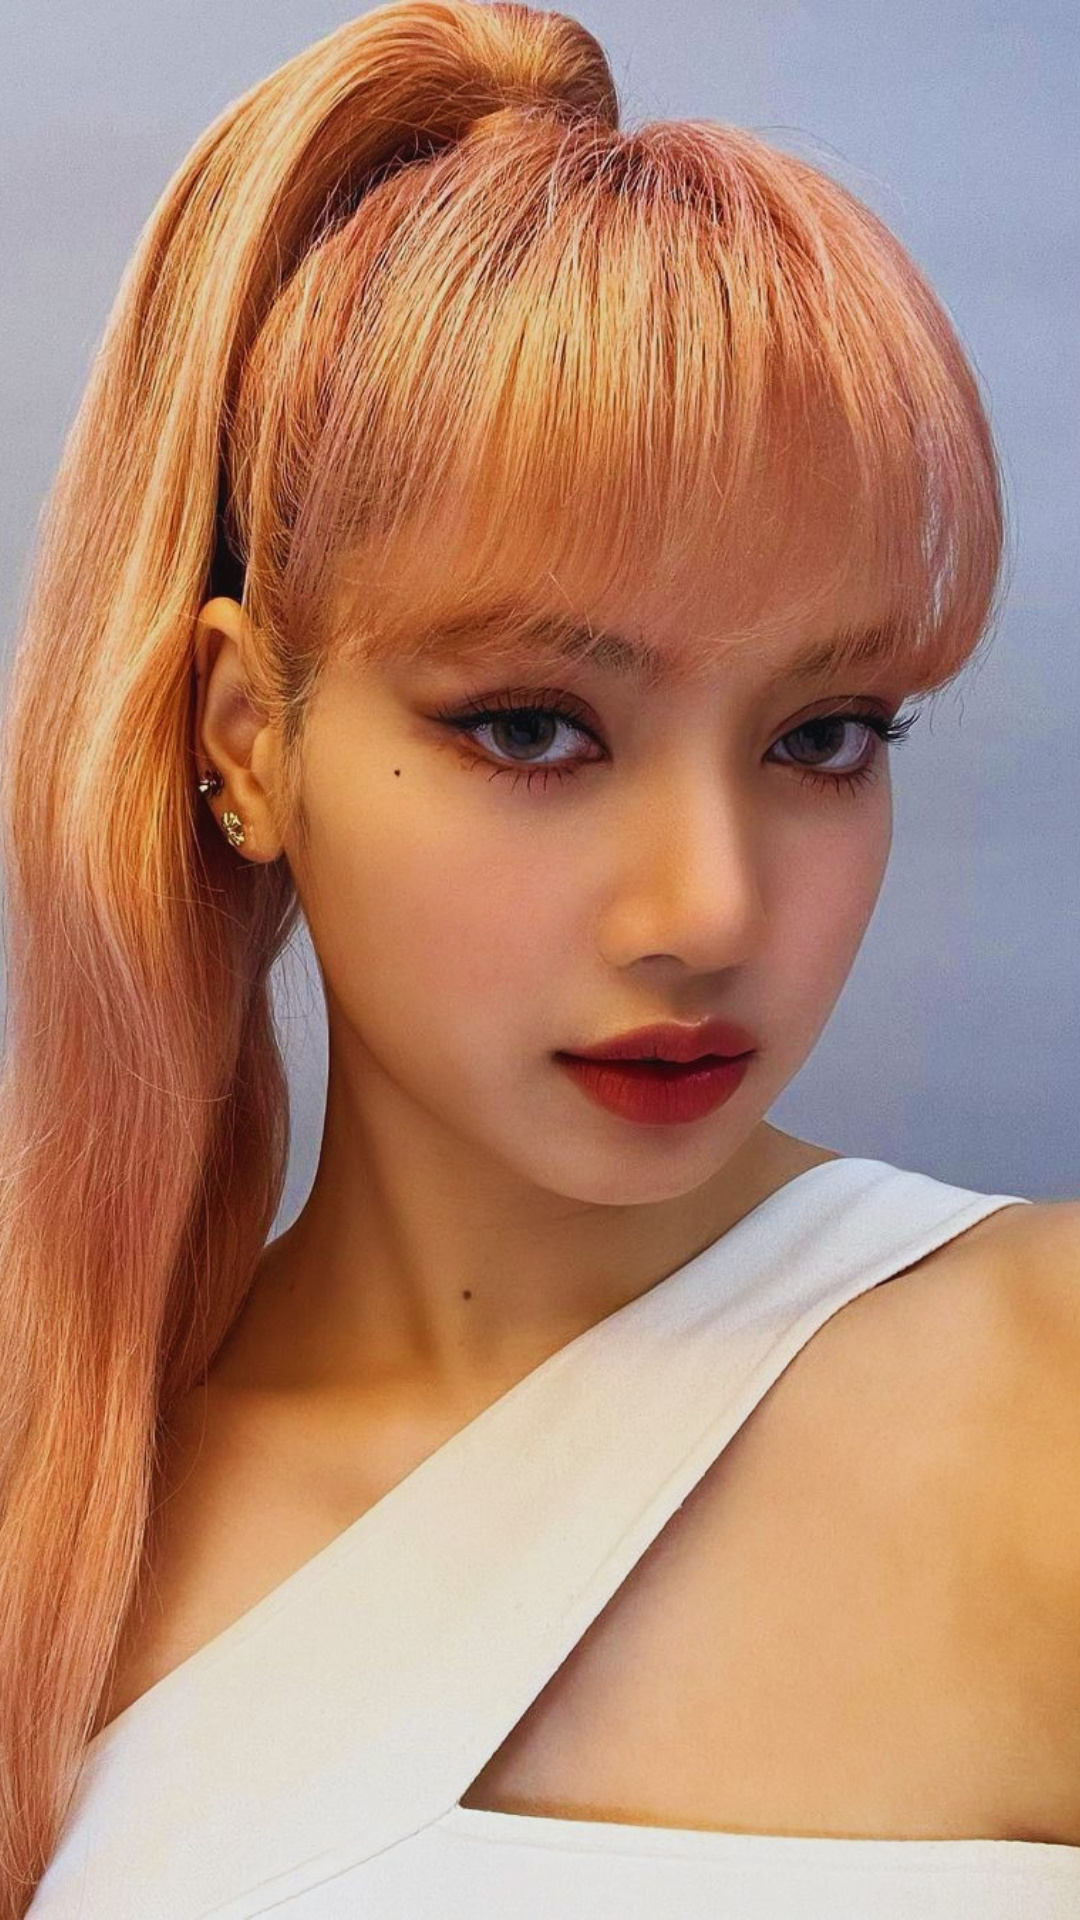 Lisa, Blackpink, 10 tell-all facts, K-pop band, Times of India, 1080x1920 Full HD Phone